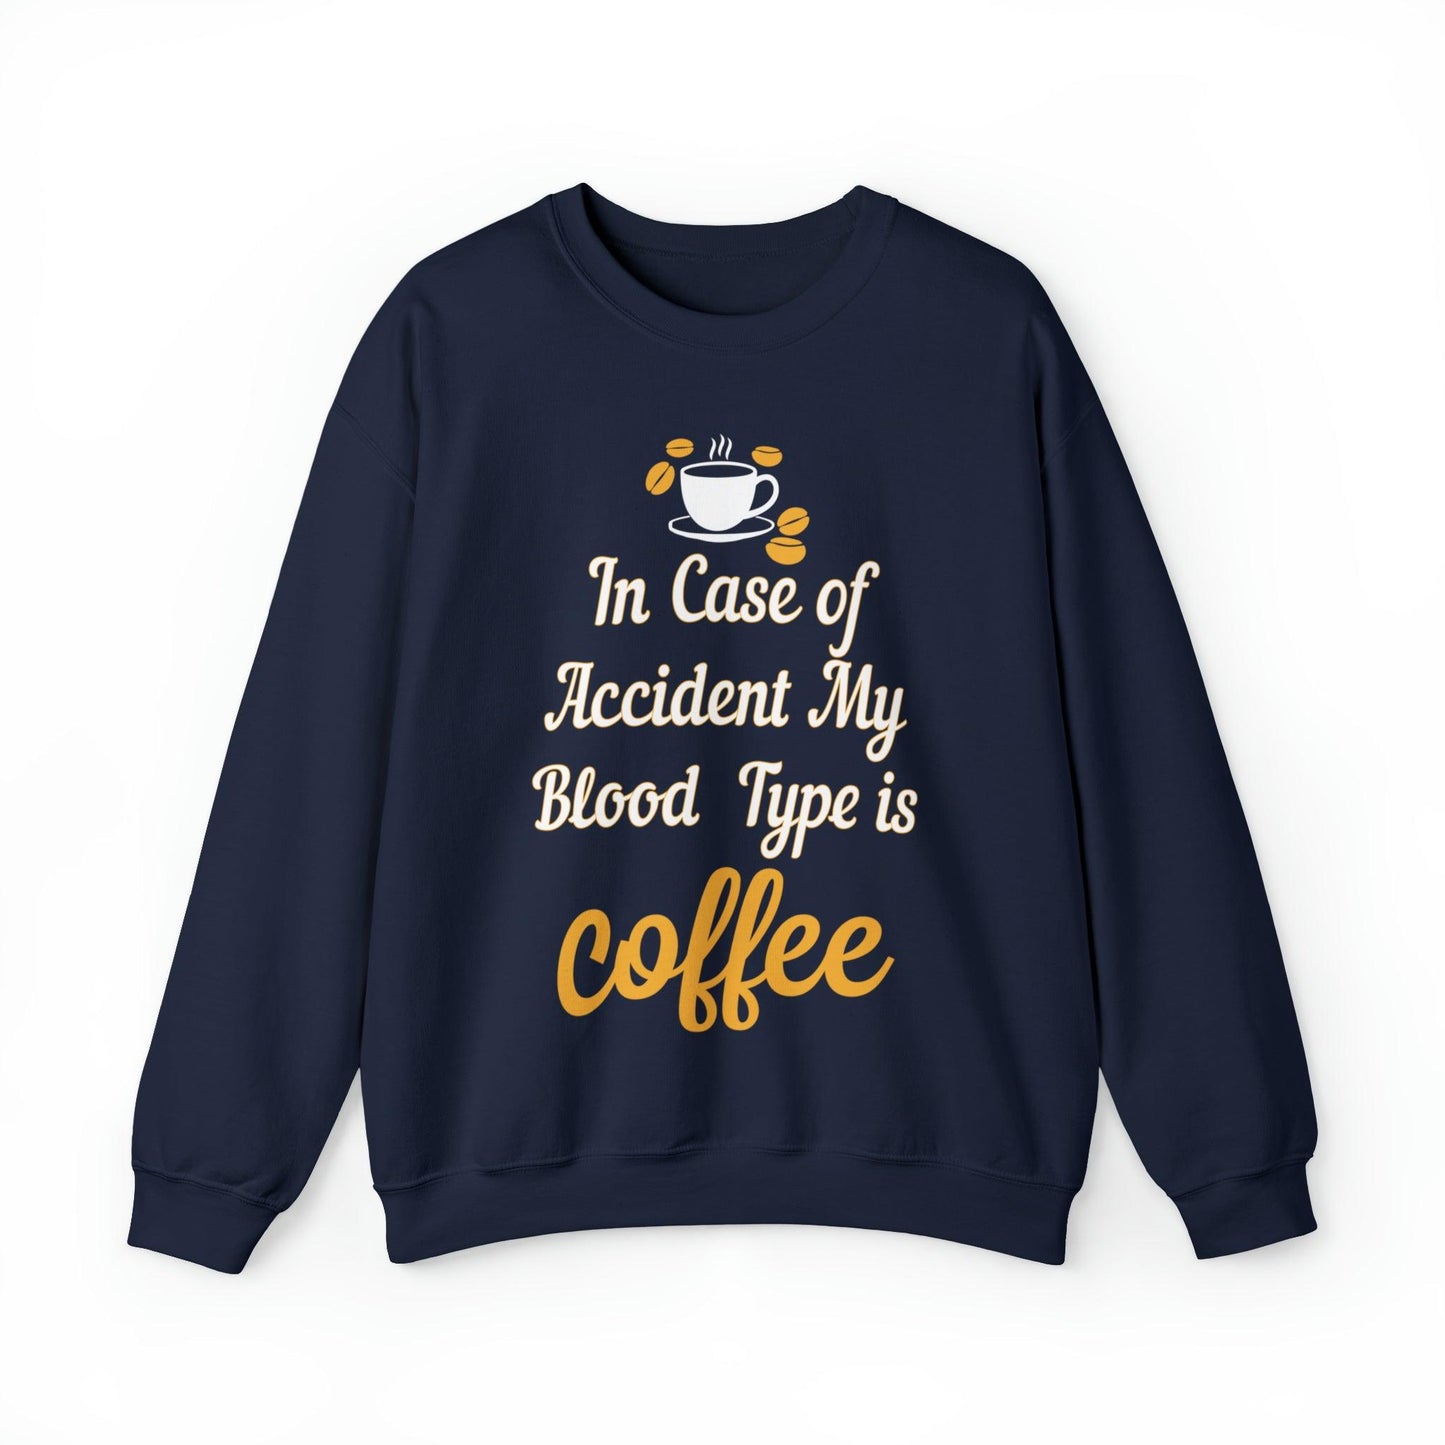 In case of Accident my blood type is coffee Sweatshirt - Giftsmojo